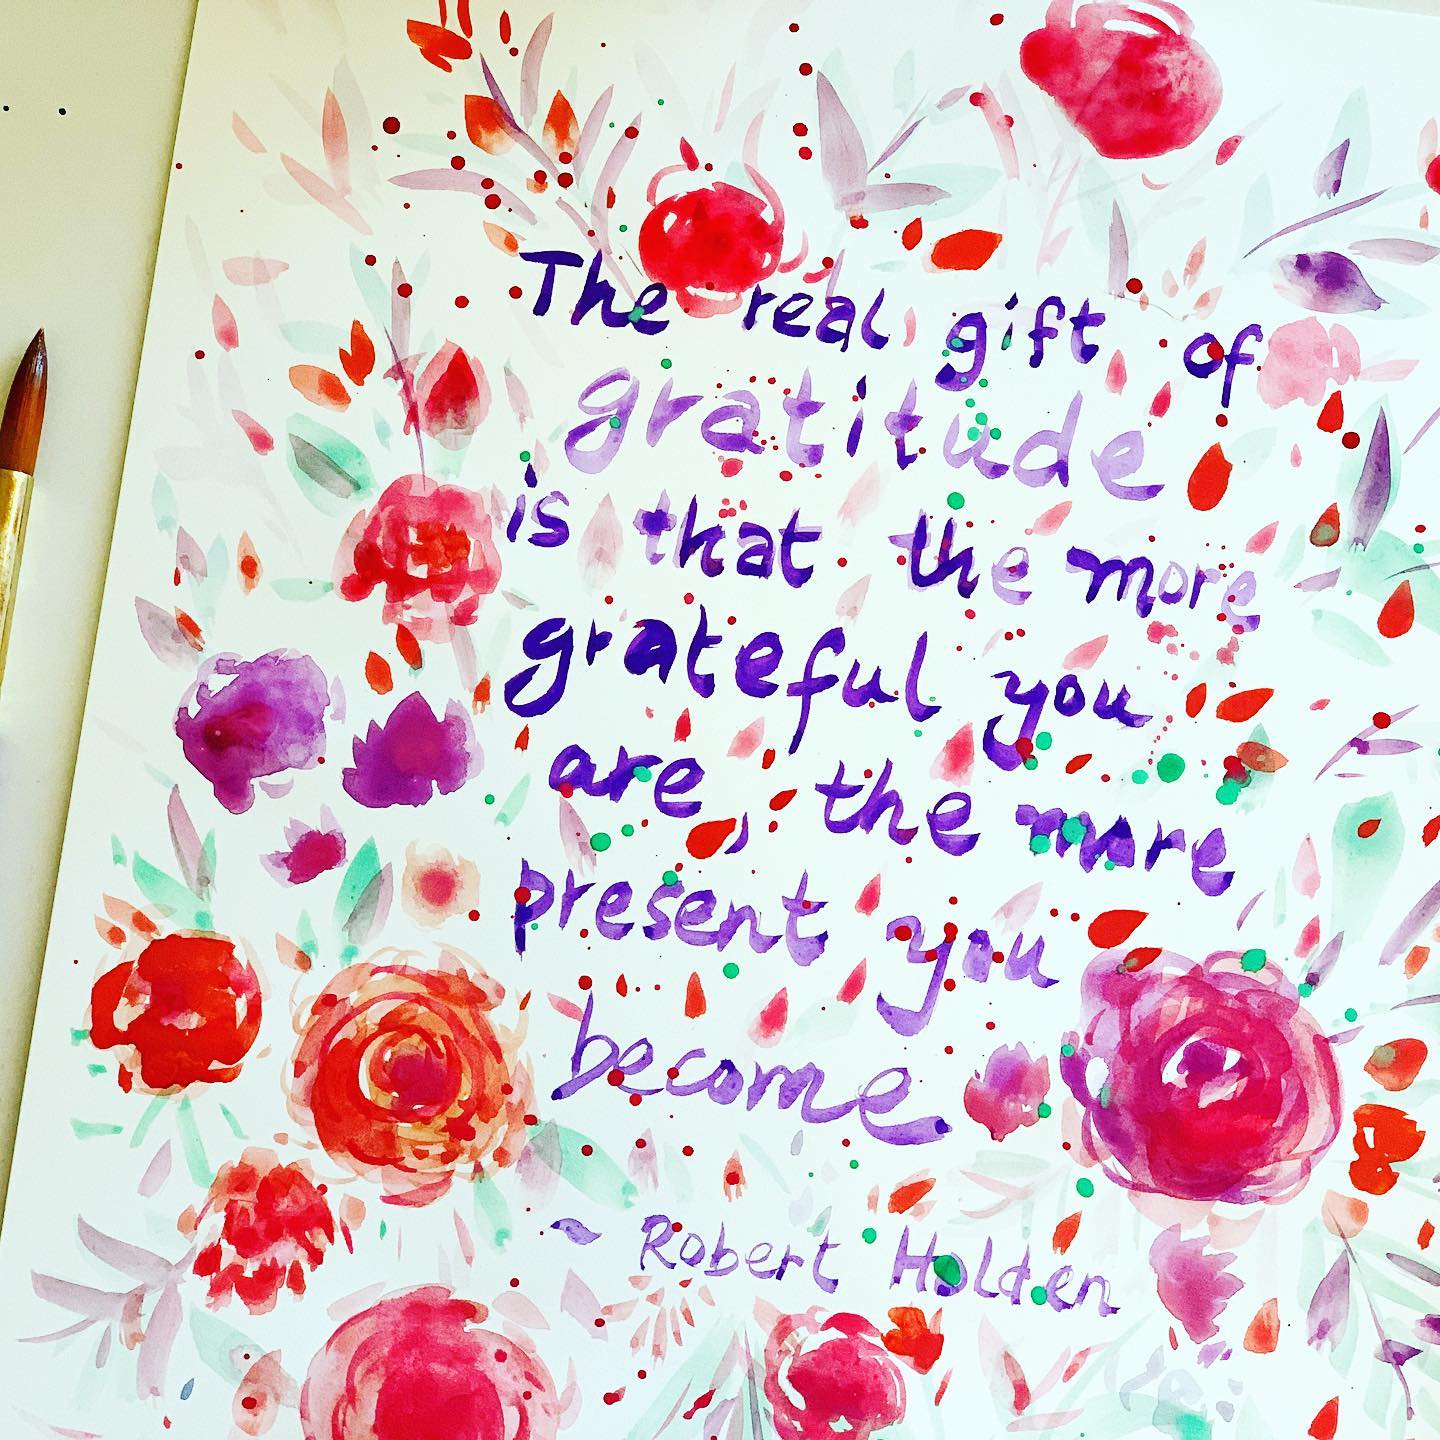 The real gift of gratitude...